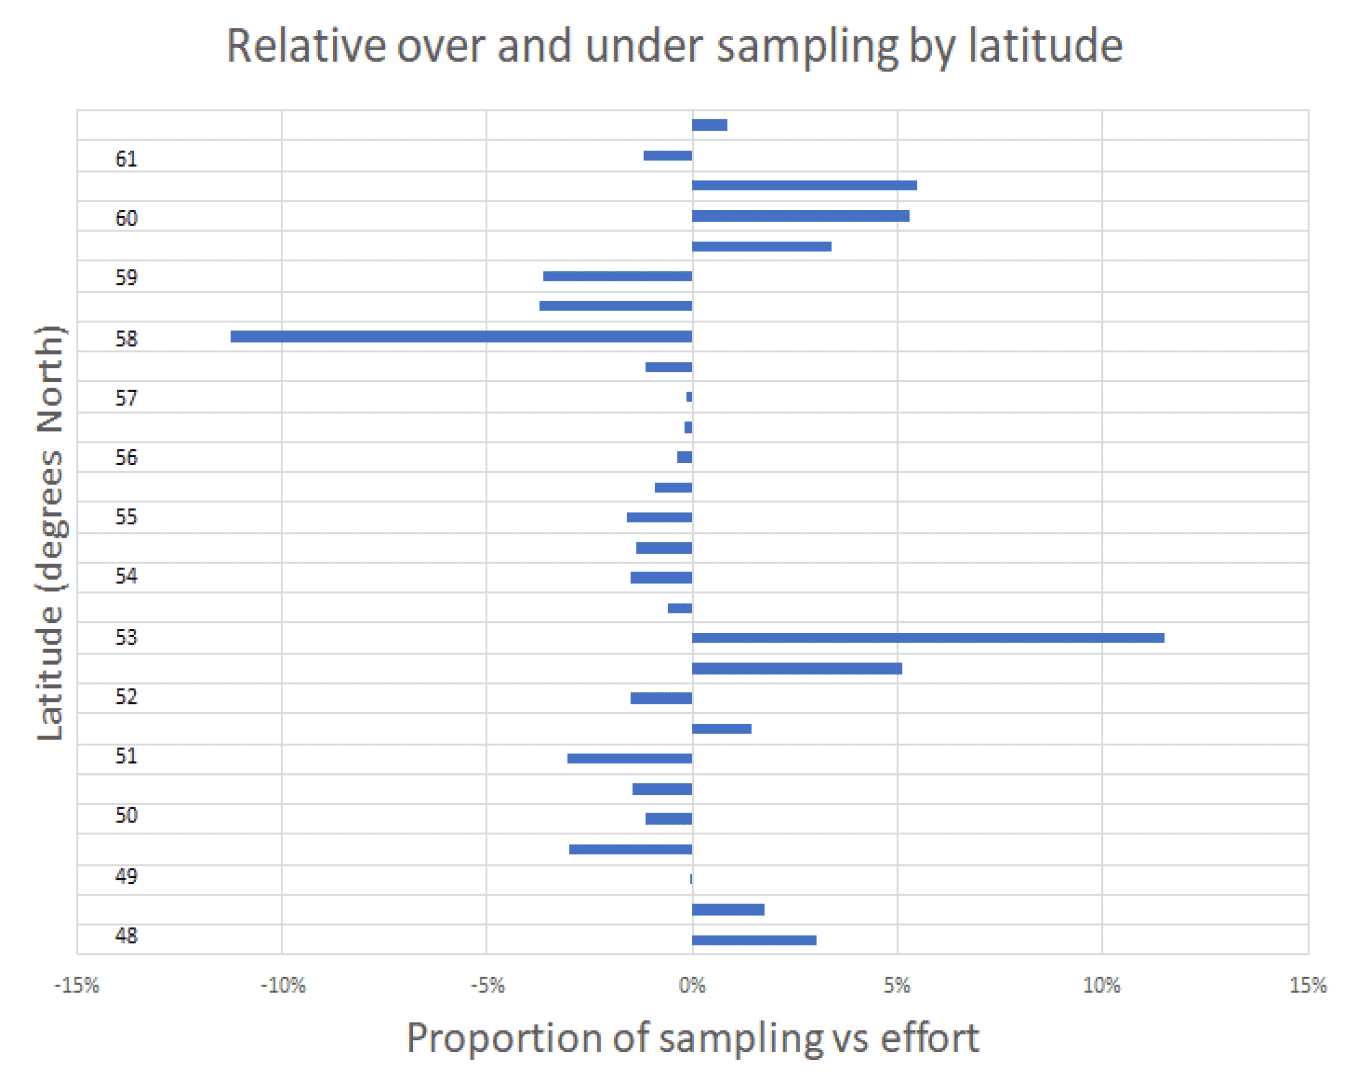 Bar chart showing the extent to which sampling is over-represented or under-represented for each half degree of latitude from 40oN to 62oN. Most over-sampled latitude is 53oN and most under sampled latitude is 58oN, each by about 12%.